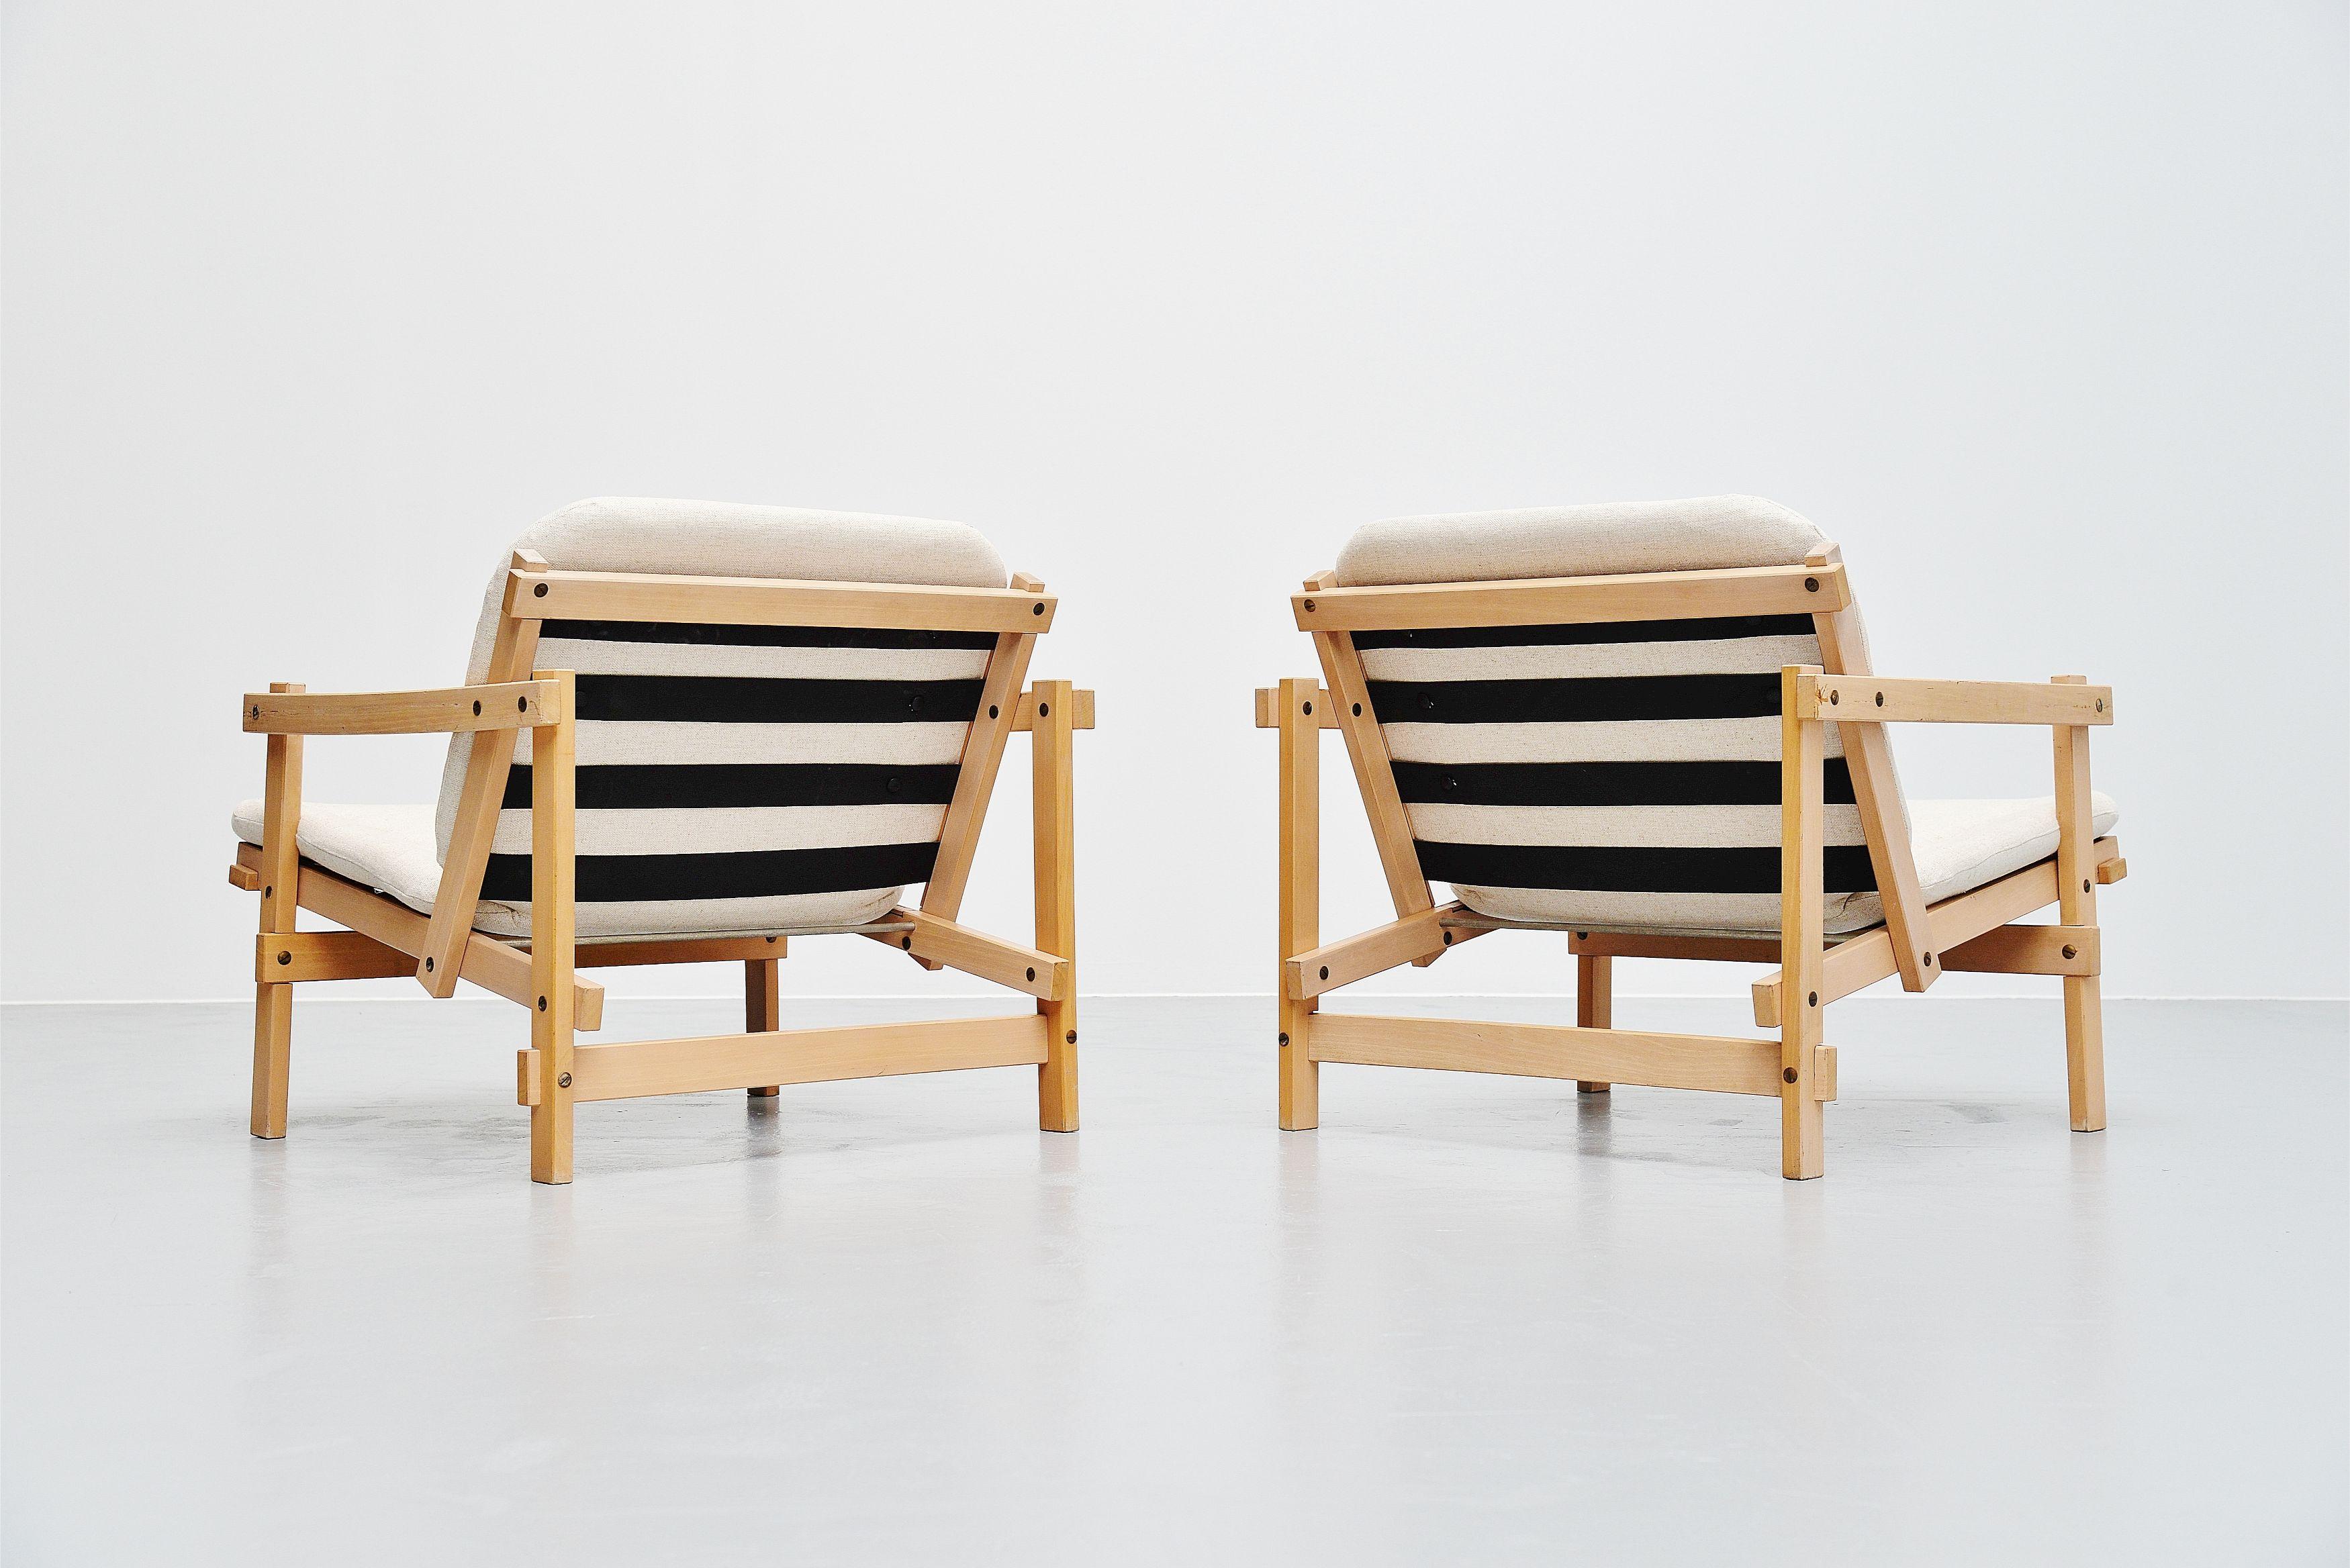 Rare pair of 'Cleon' lounge chairs designed by Martin Visser and manufactured by 't Spectrum, Holland 1964. The chairs have solid beech wooden slat structure which was white wahed, this design was clearly inspired by the works from Gerrit Rietveld.